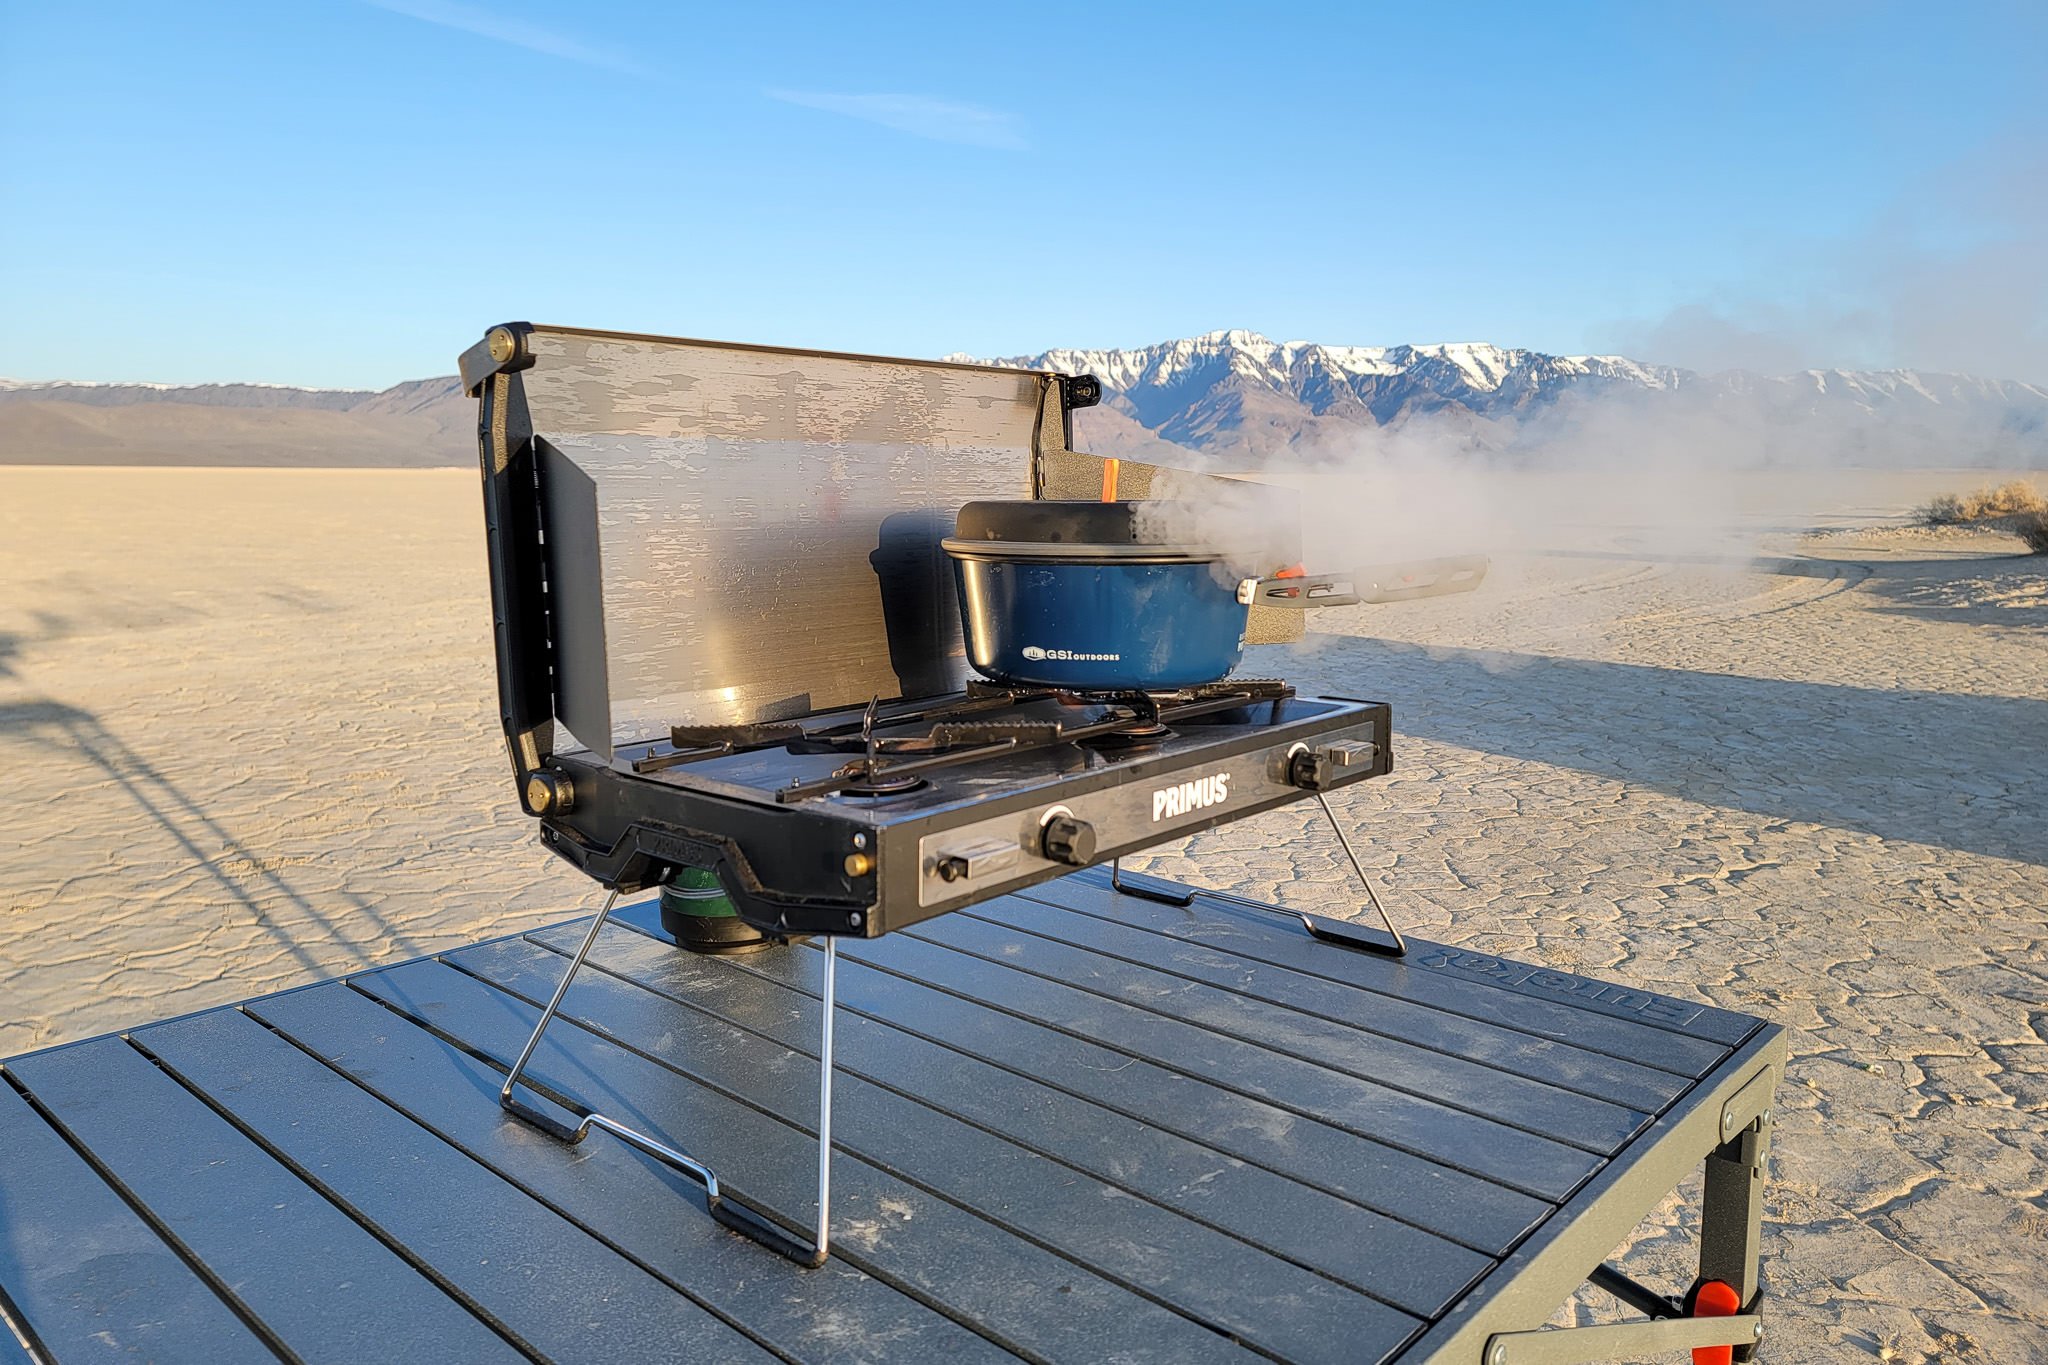 Using the Primus Tupike camp stove in the Alvord Desert